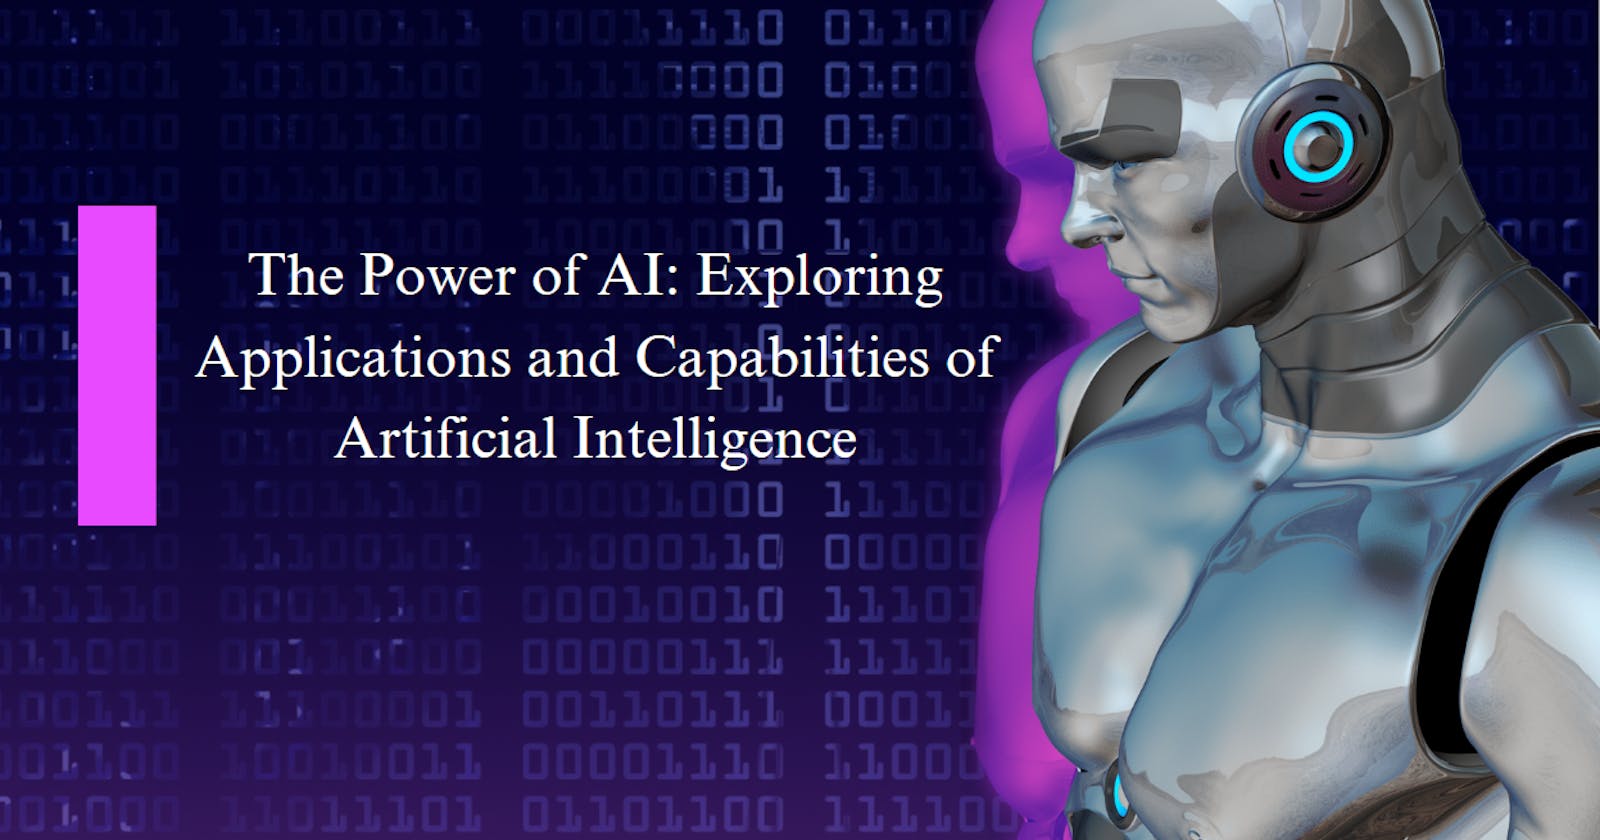 The Power of AI Exploring Applications and Capabilities of Artificial Intelligence